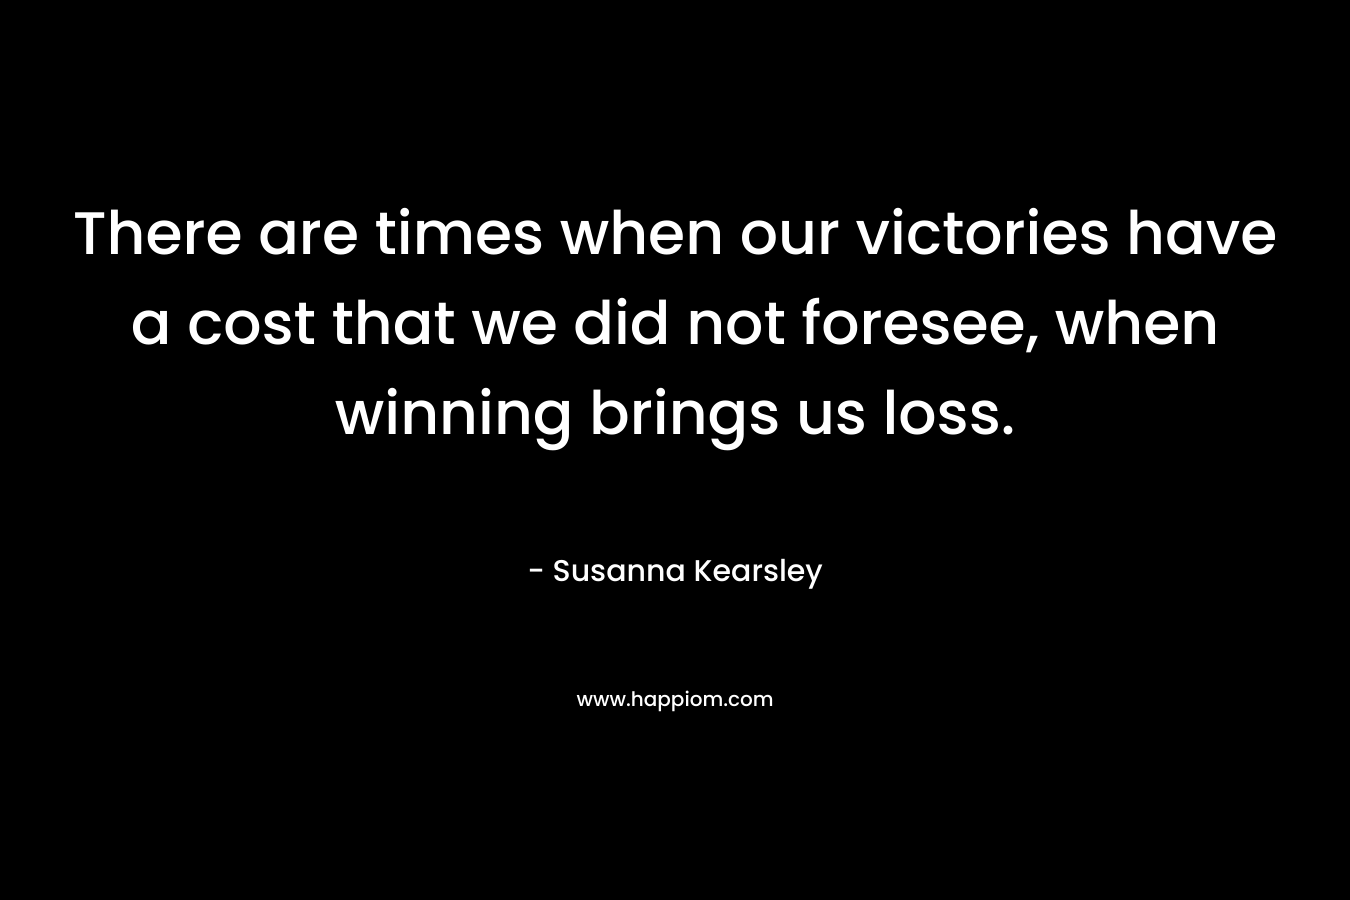 There are times when our victories have a cost that we did not foresee, when winning brings us loss. – Susanna Kearsley